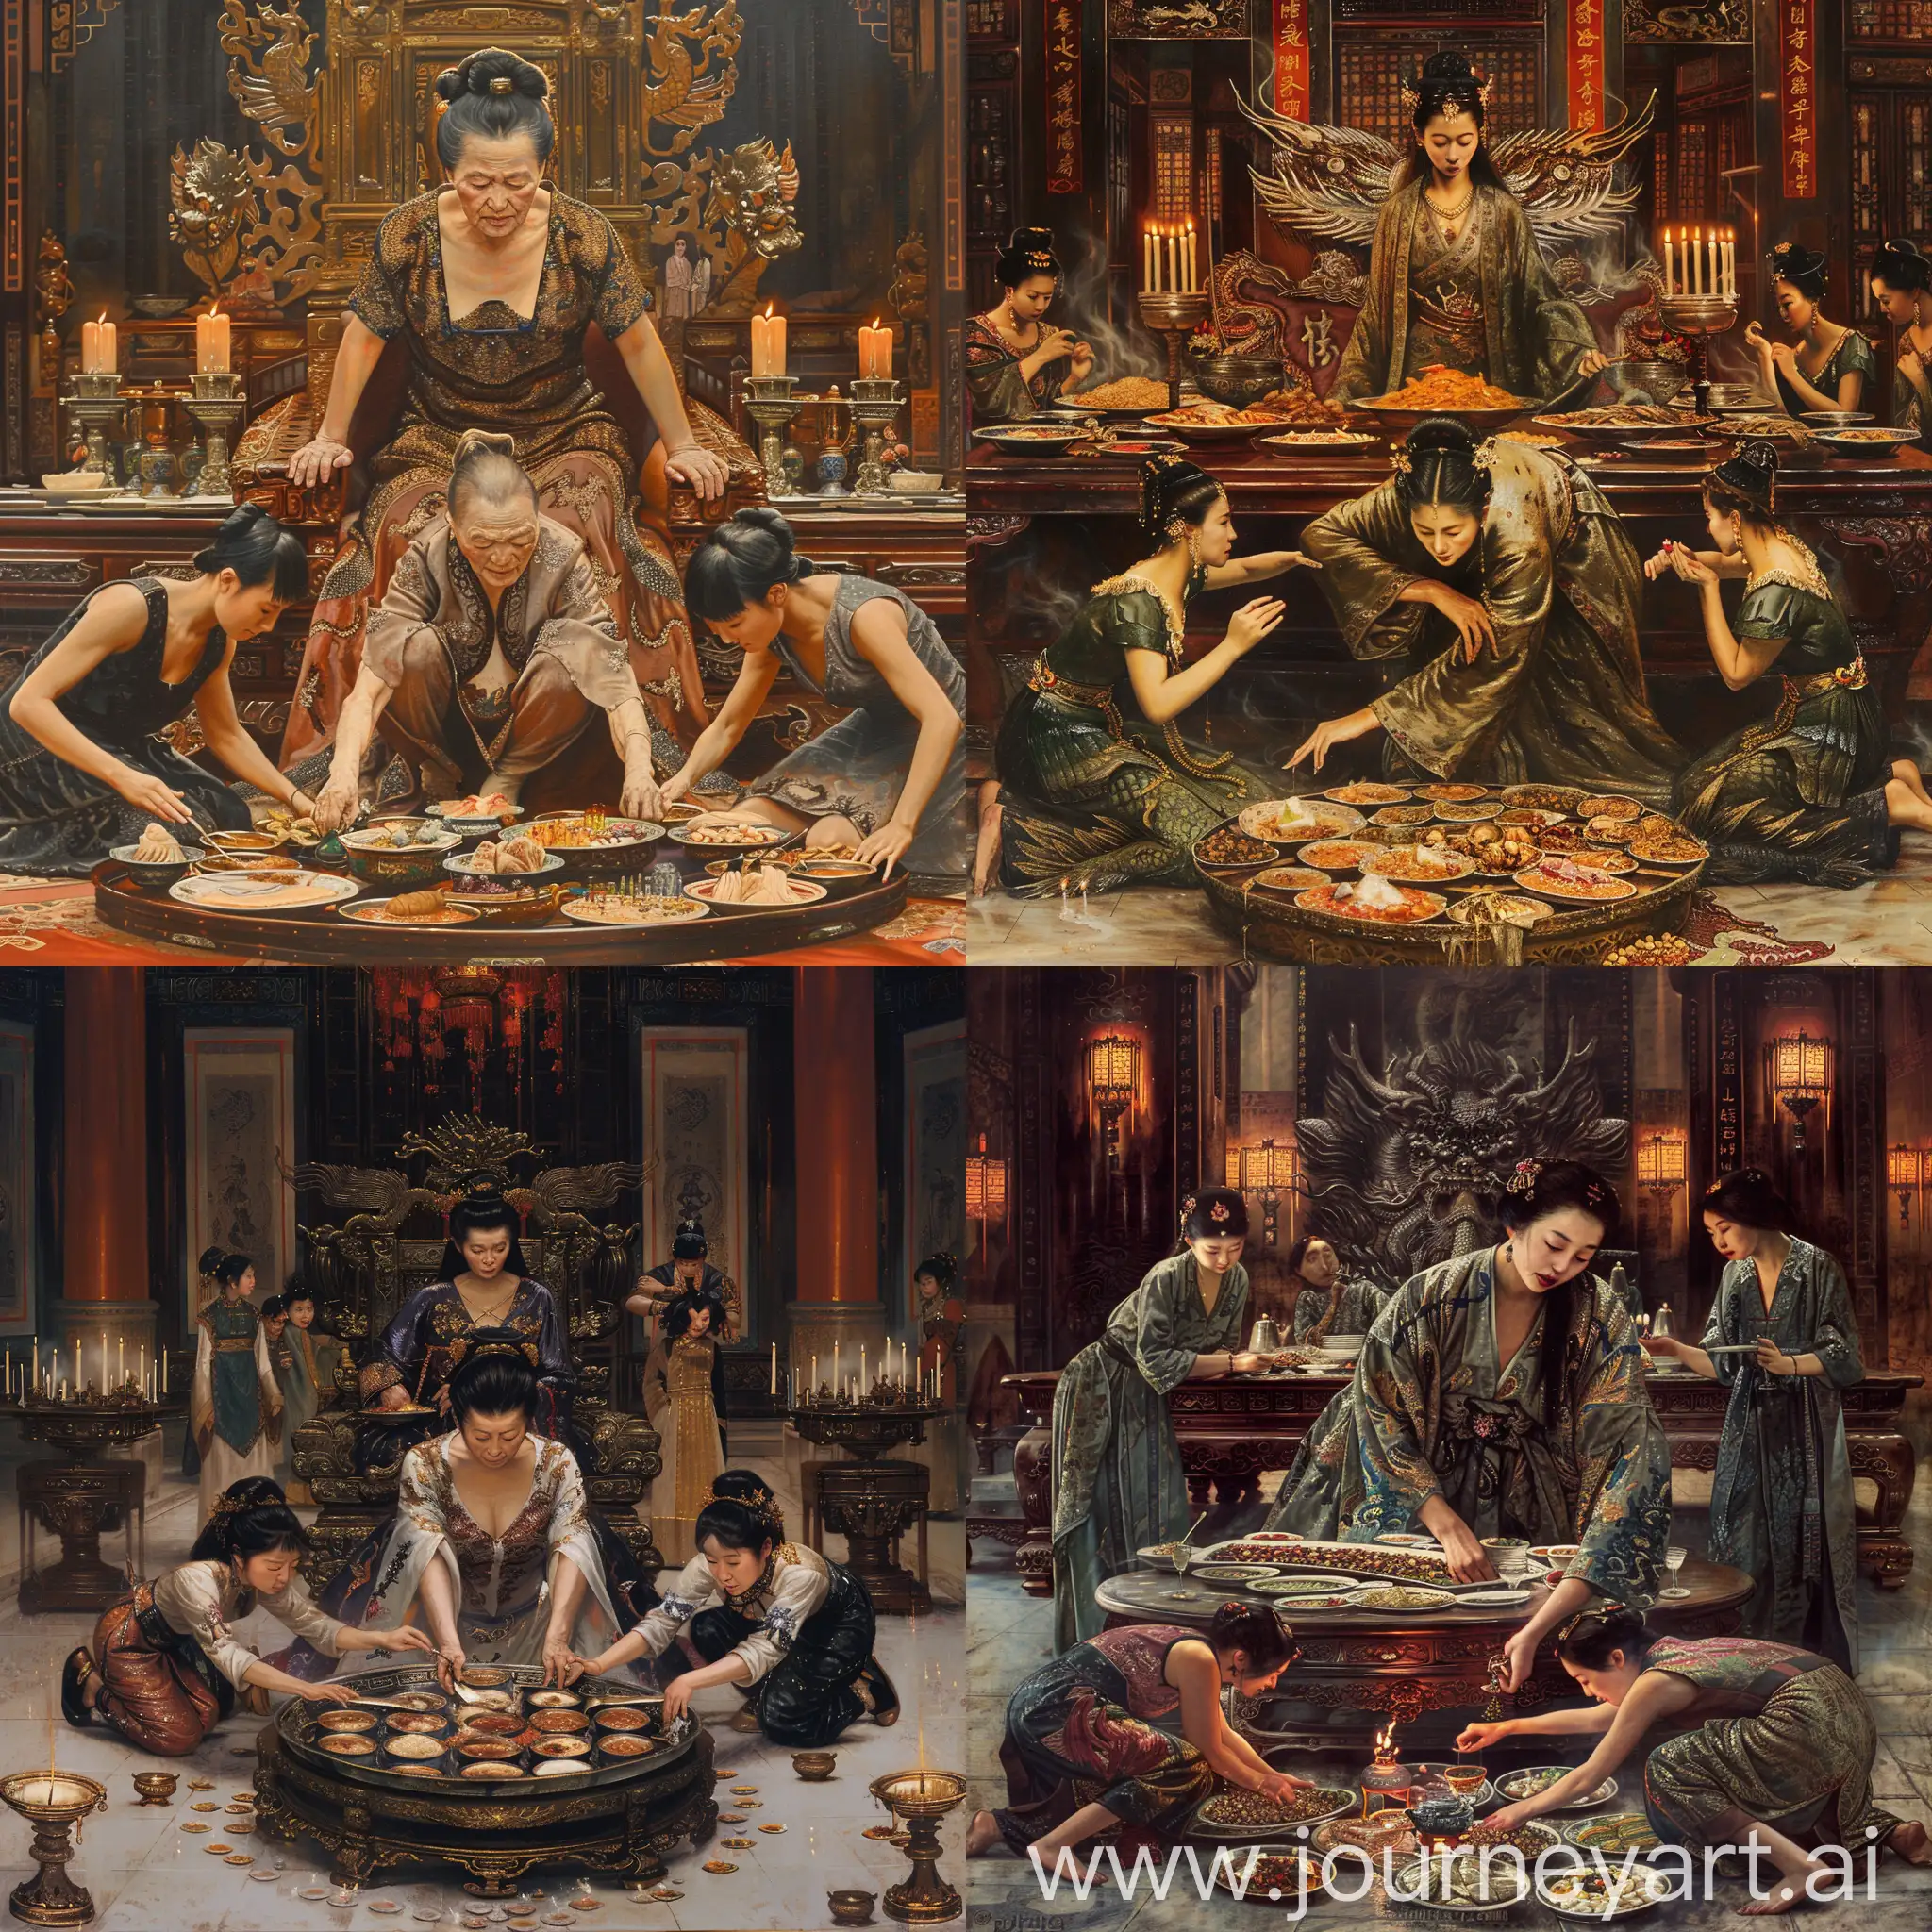 Empress-Dowager-Cixi-Dining-in-Splendid-Grand-Hall-Rich-Details-and-Eminence-Displayed